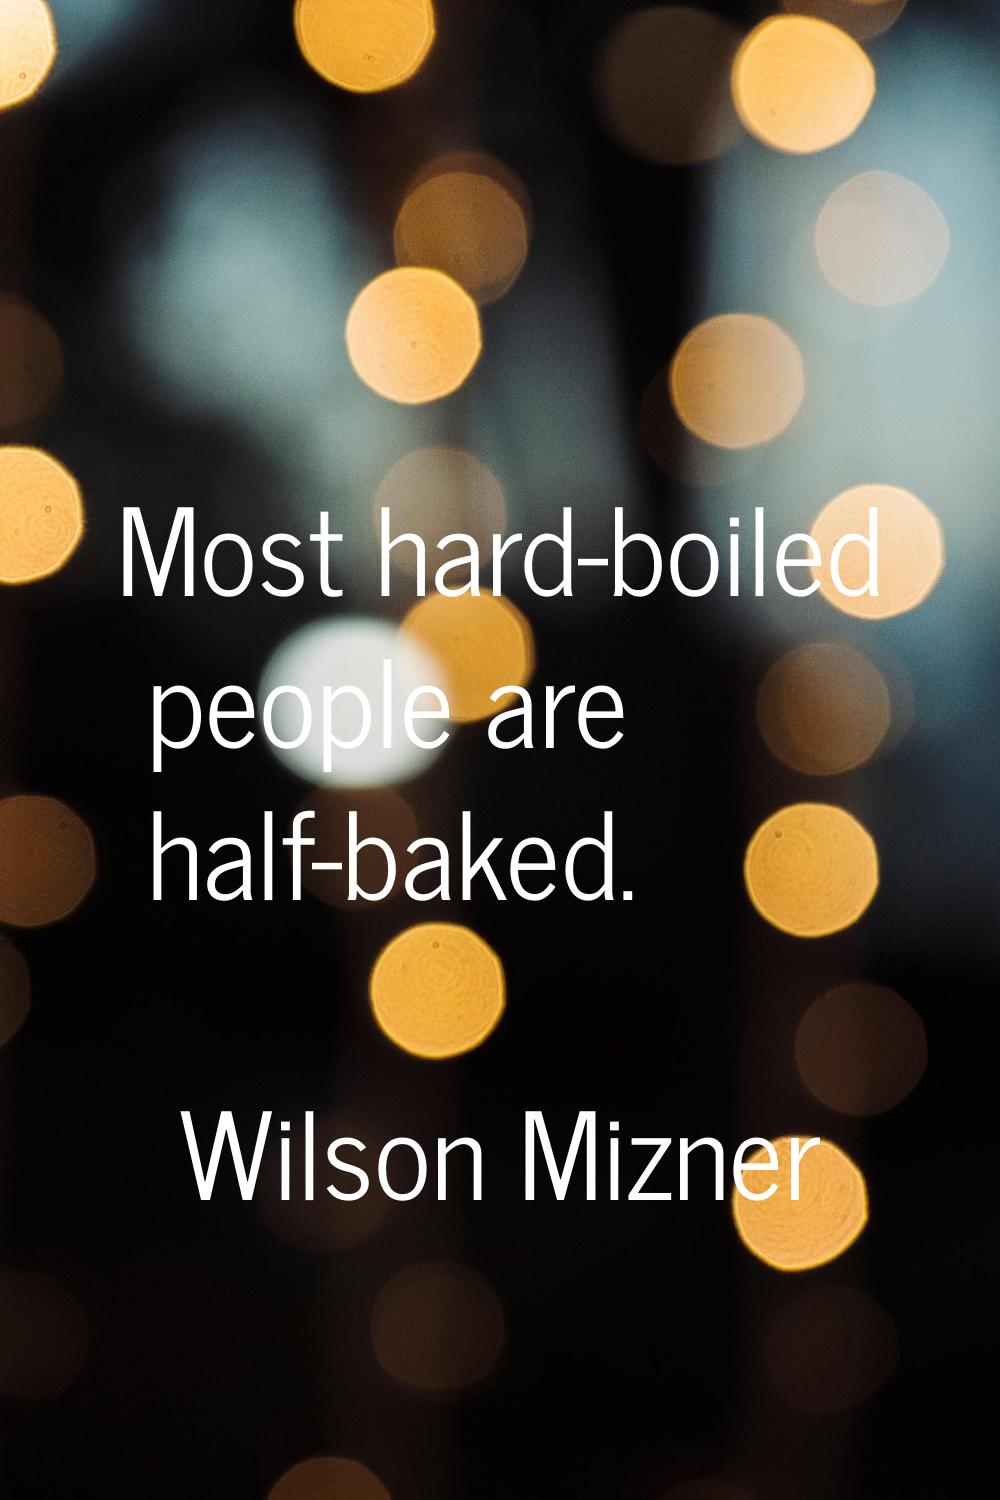 Most hard-boiled people are half-baked.